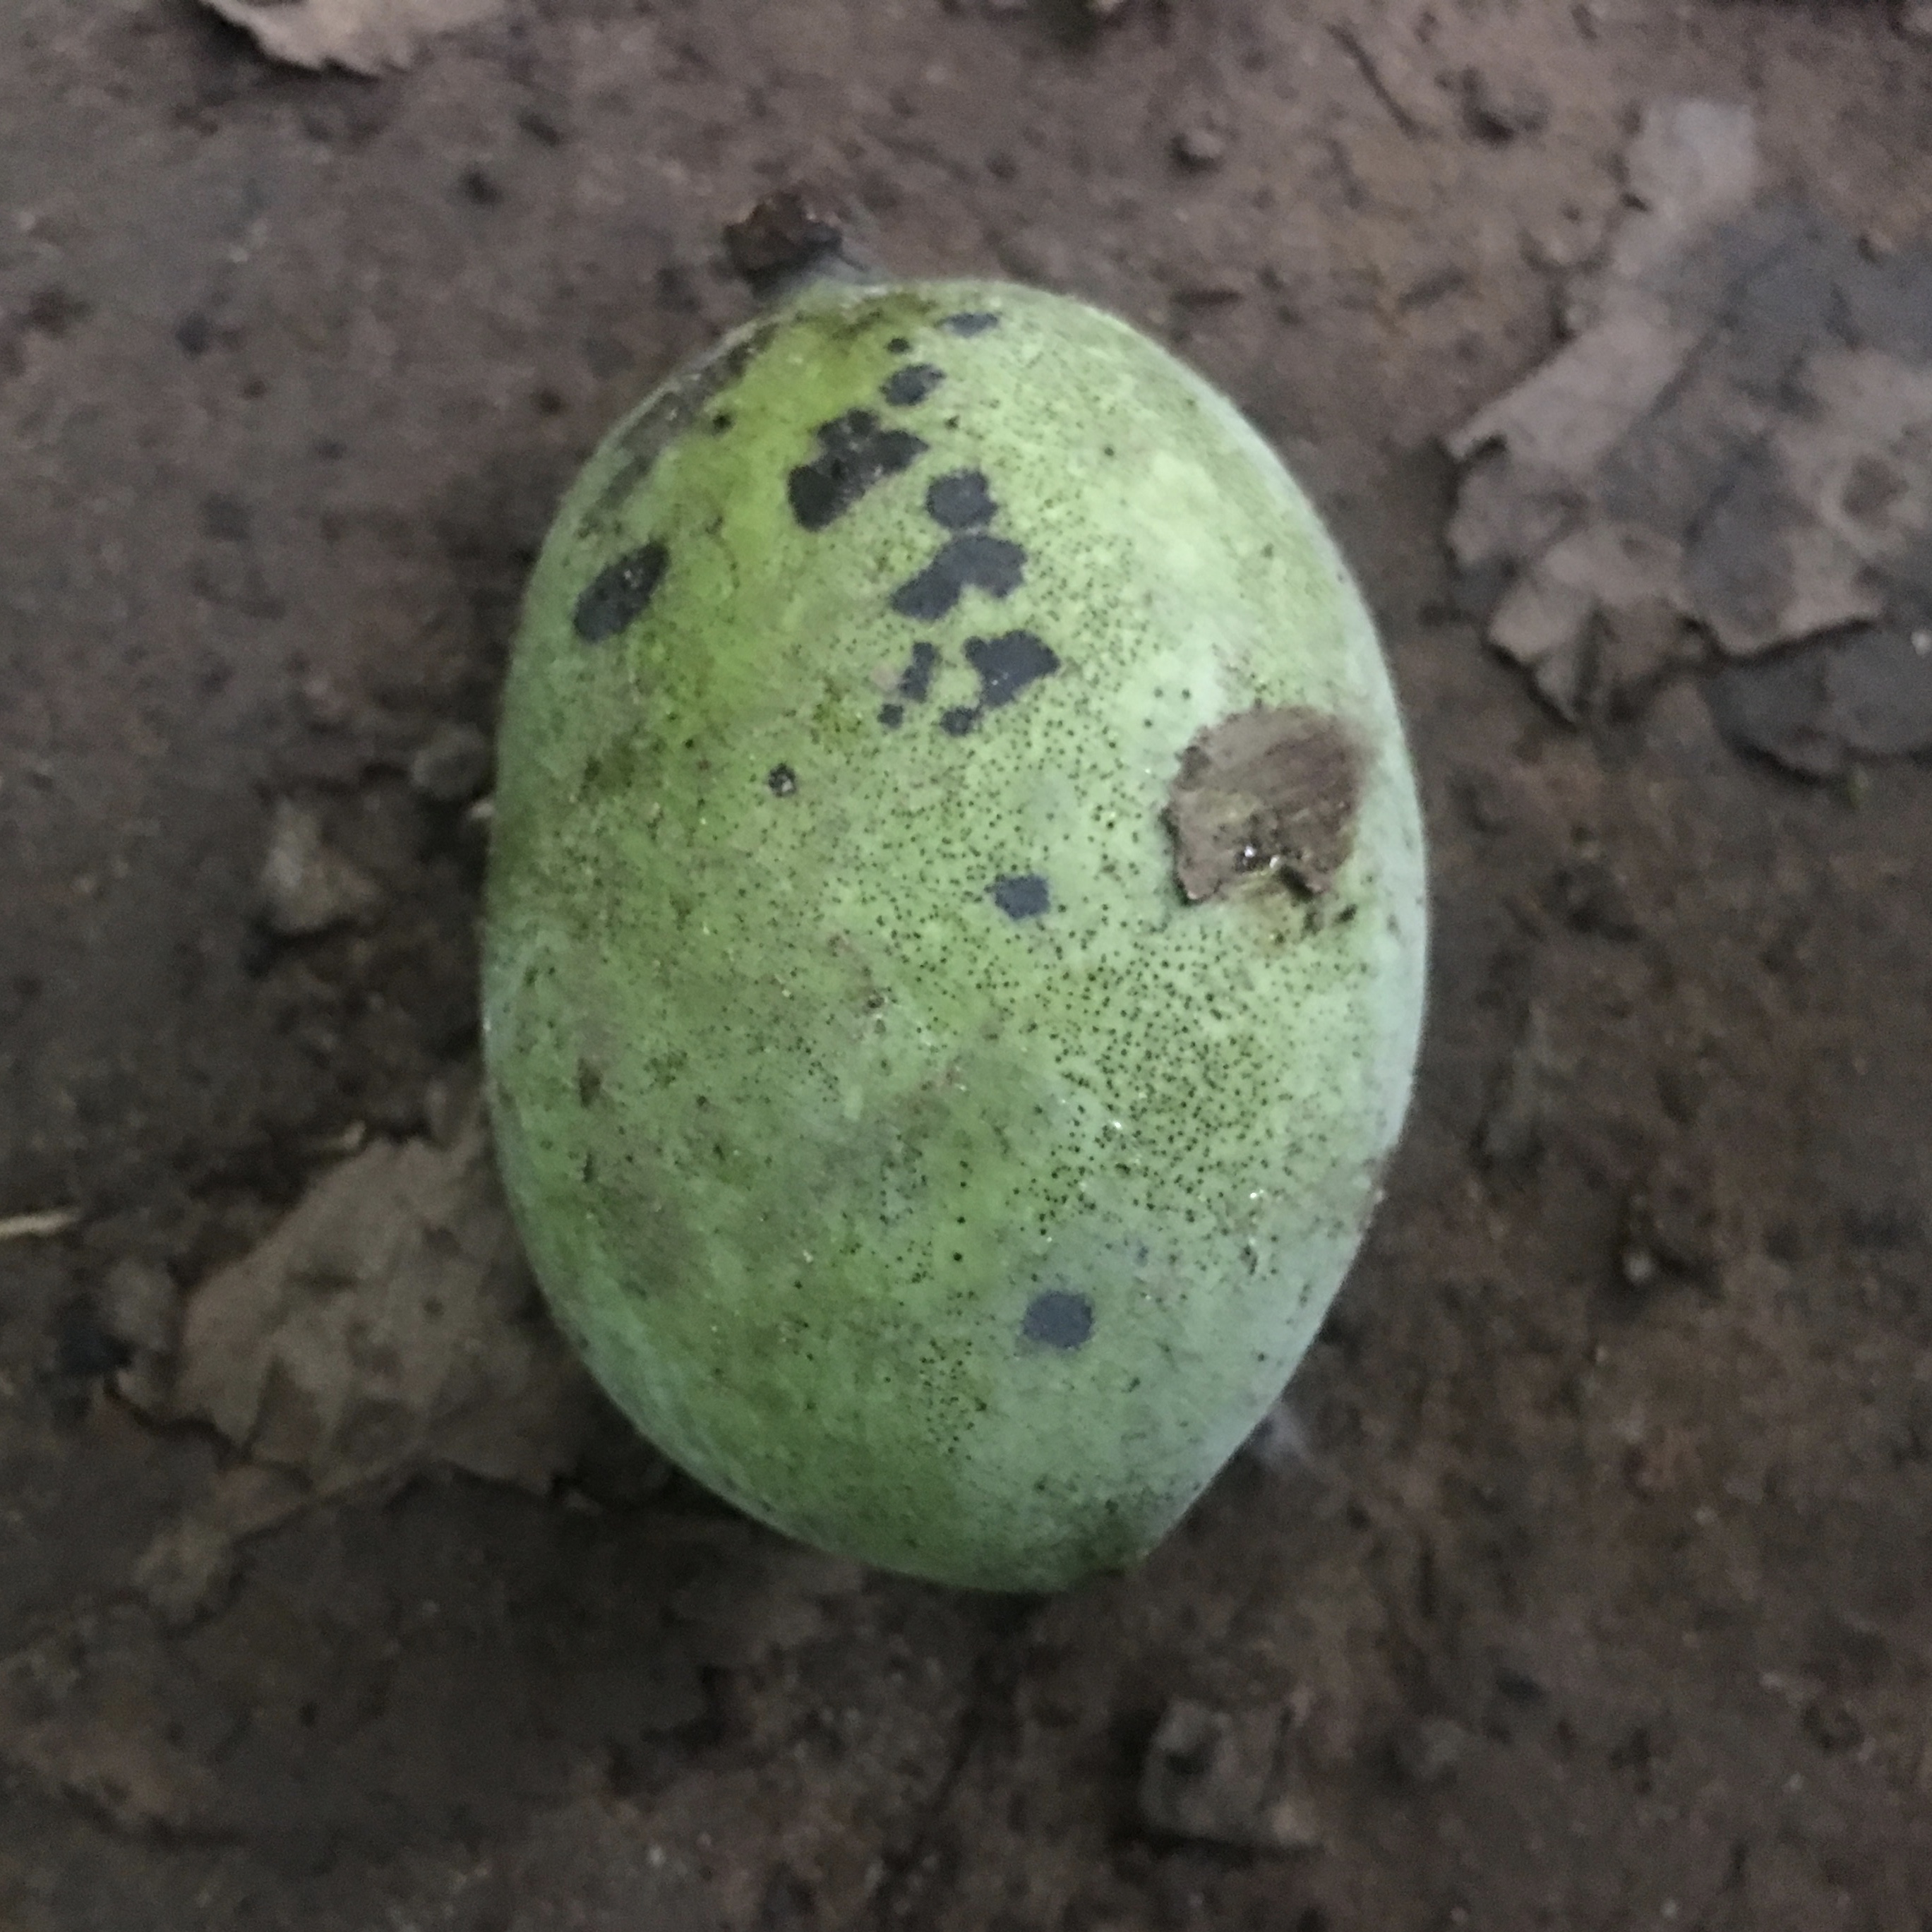 A mature paw paw fruit.